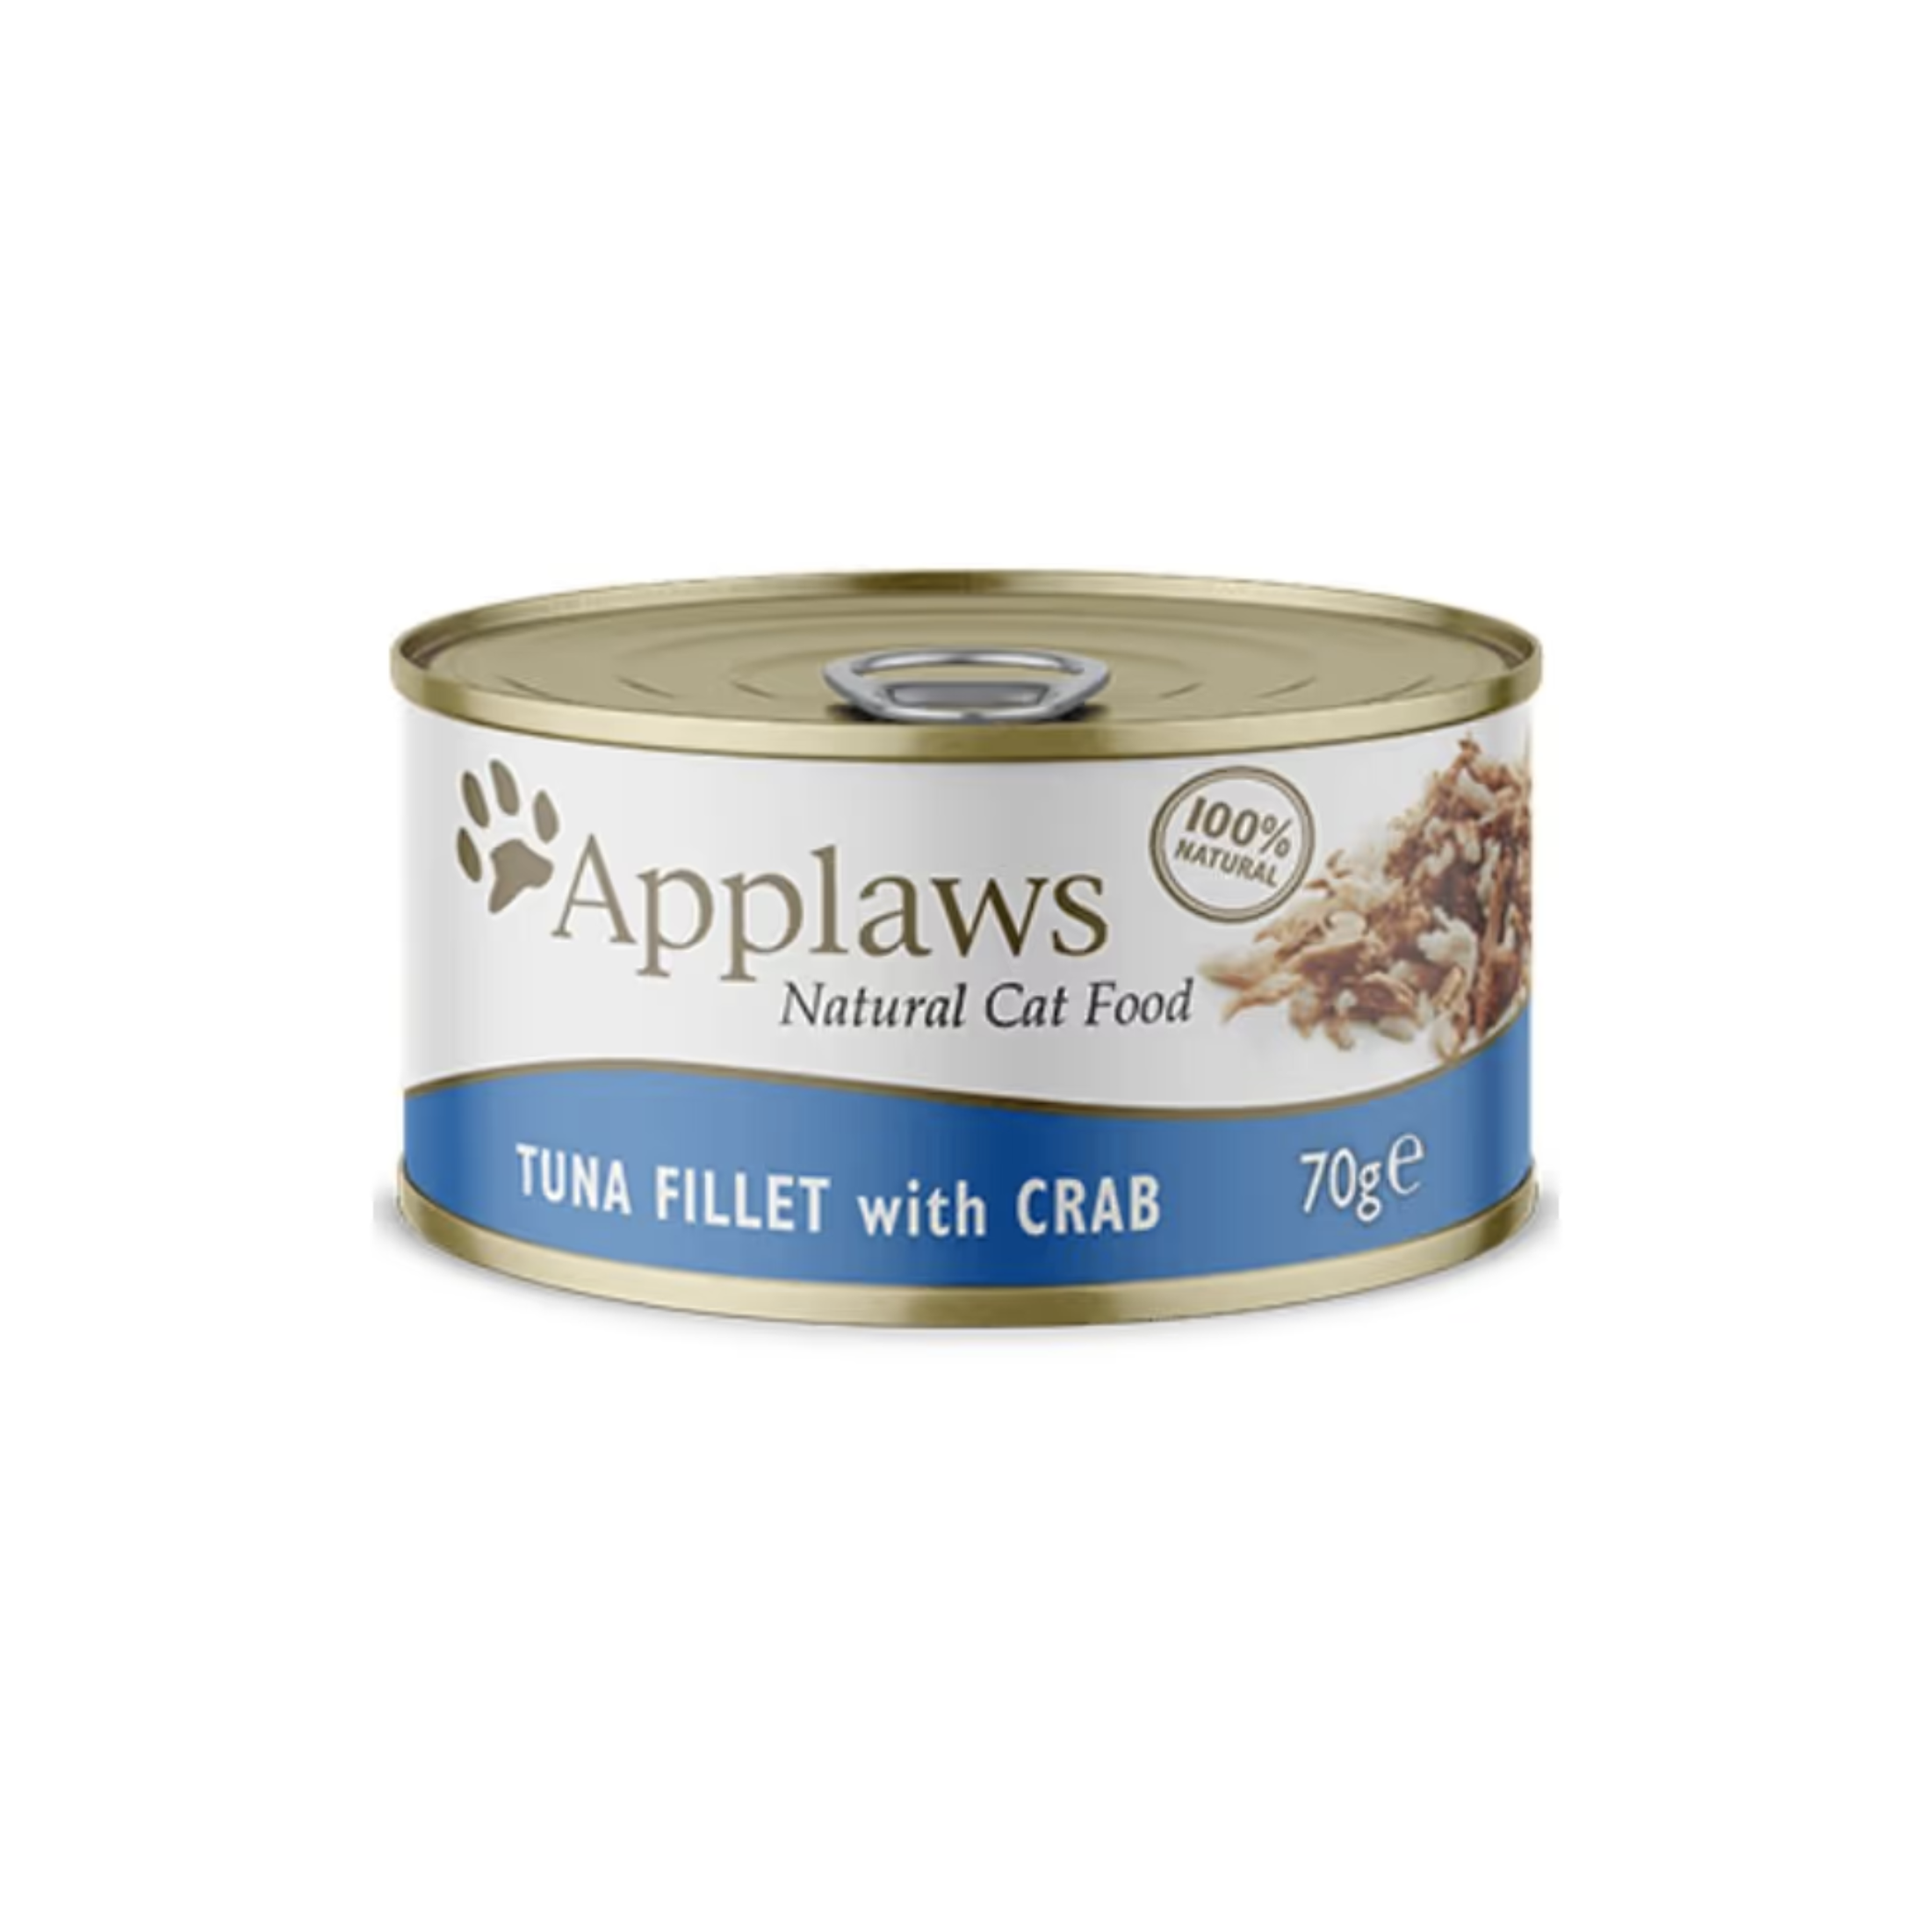 Applaws Adult Cat Wet Food - Tuna Fillet with Crab, Grain and Potato Free, High Protein, 70 g